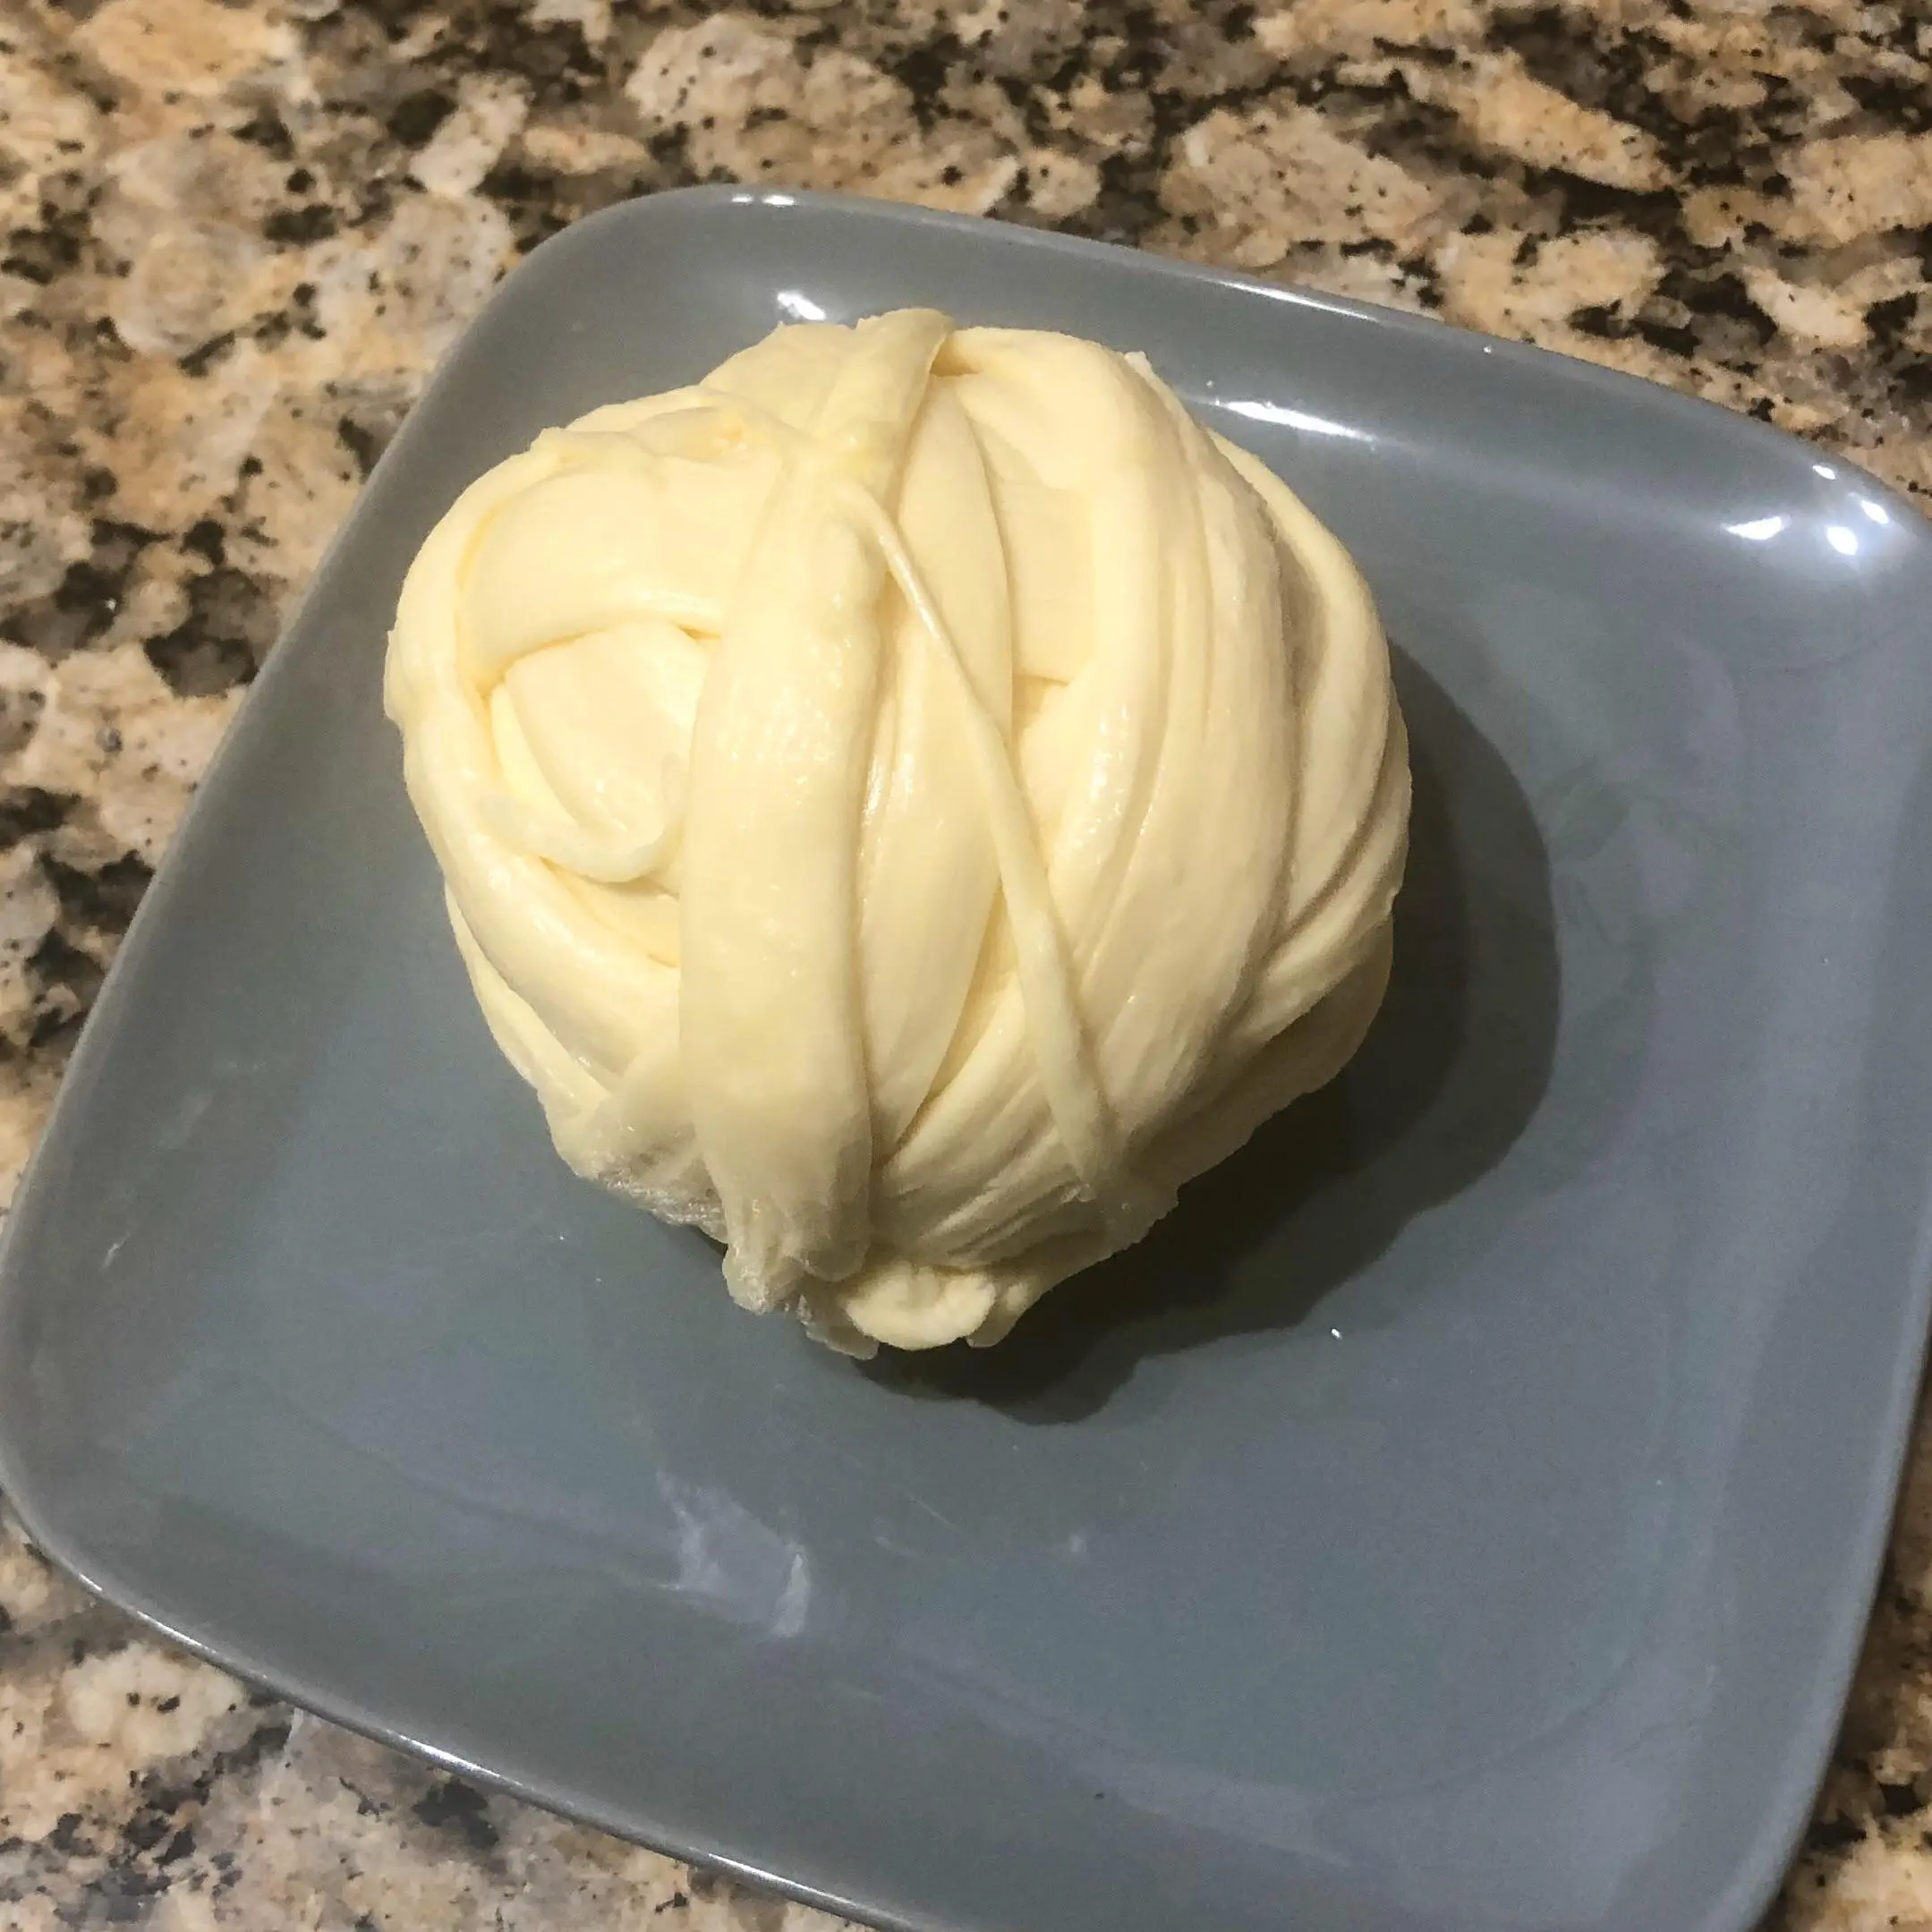 Oaxaca cheese is hard to find in my area, so I made my own ...